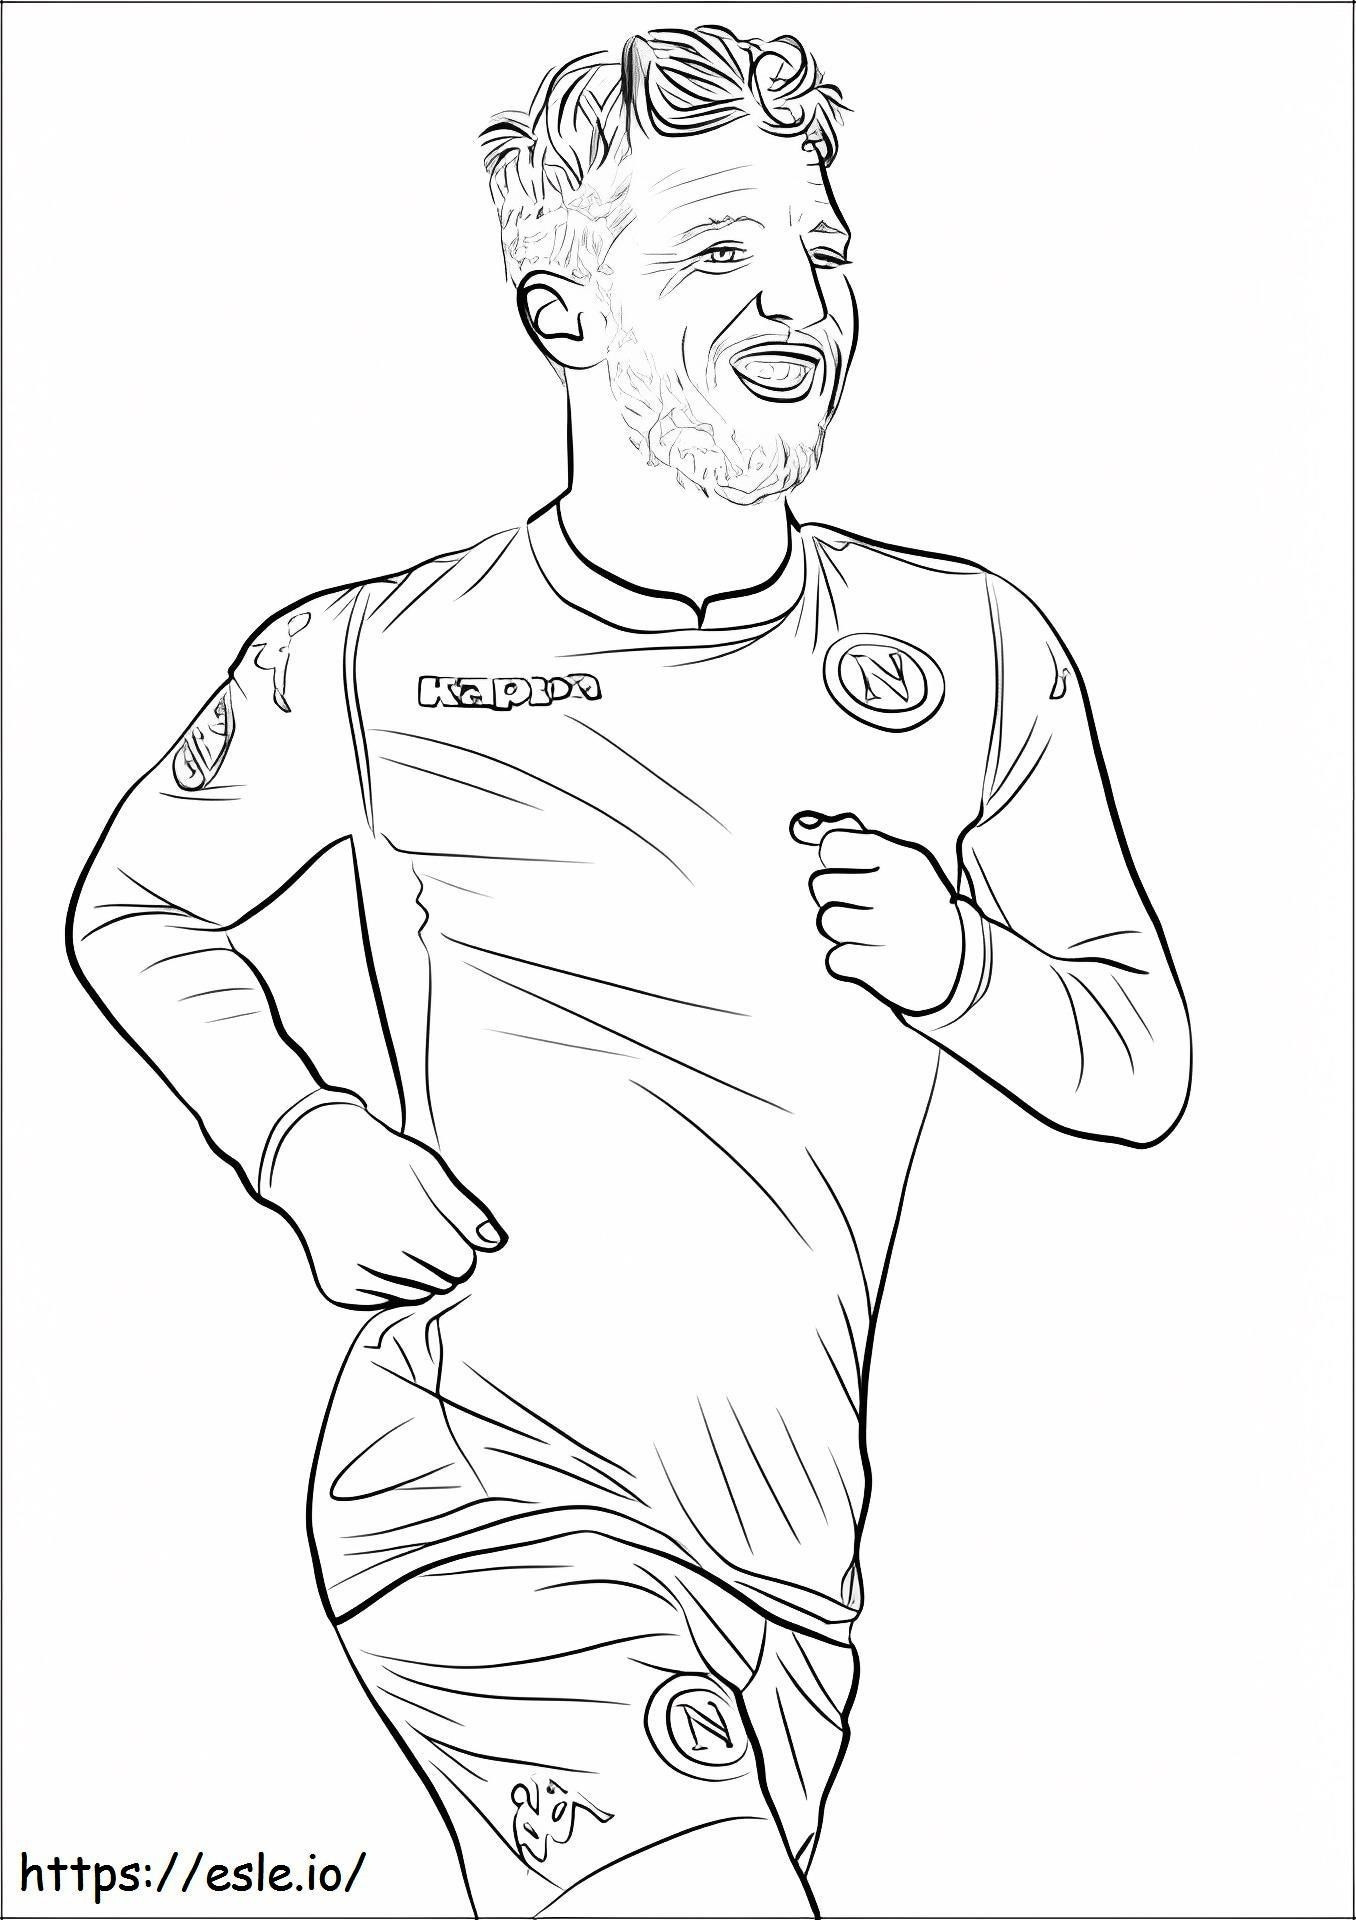 1528774771 Dries Mertensa4 coloring page